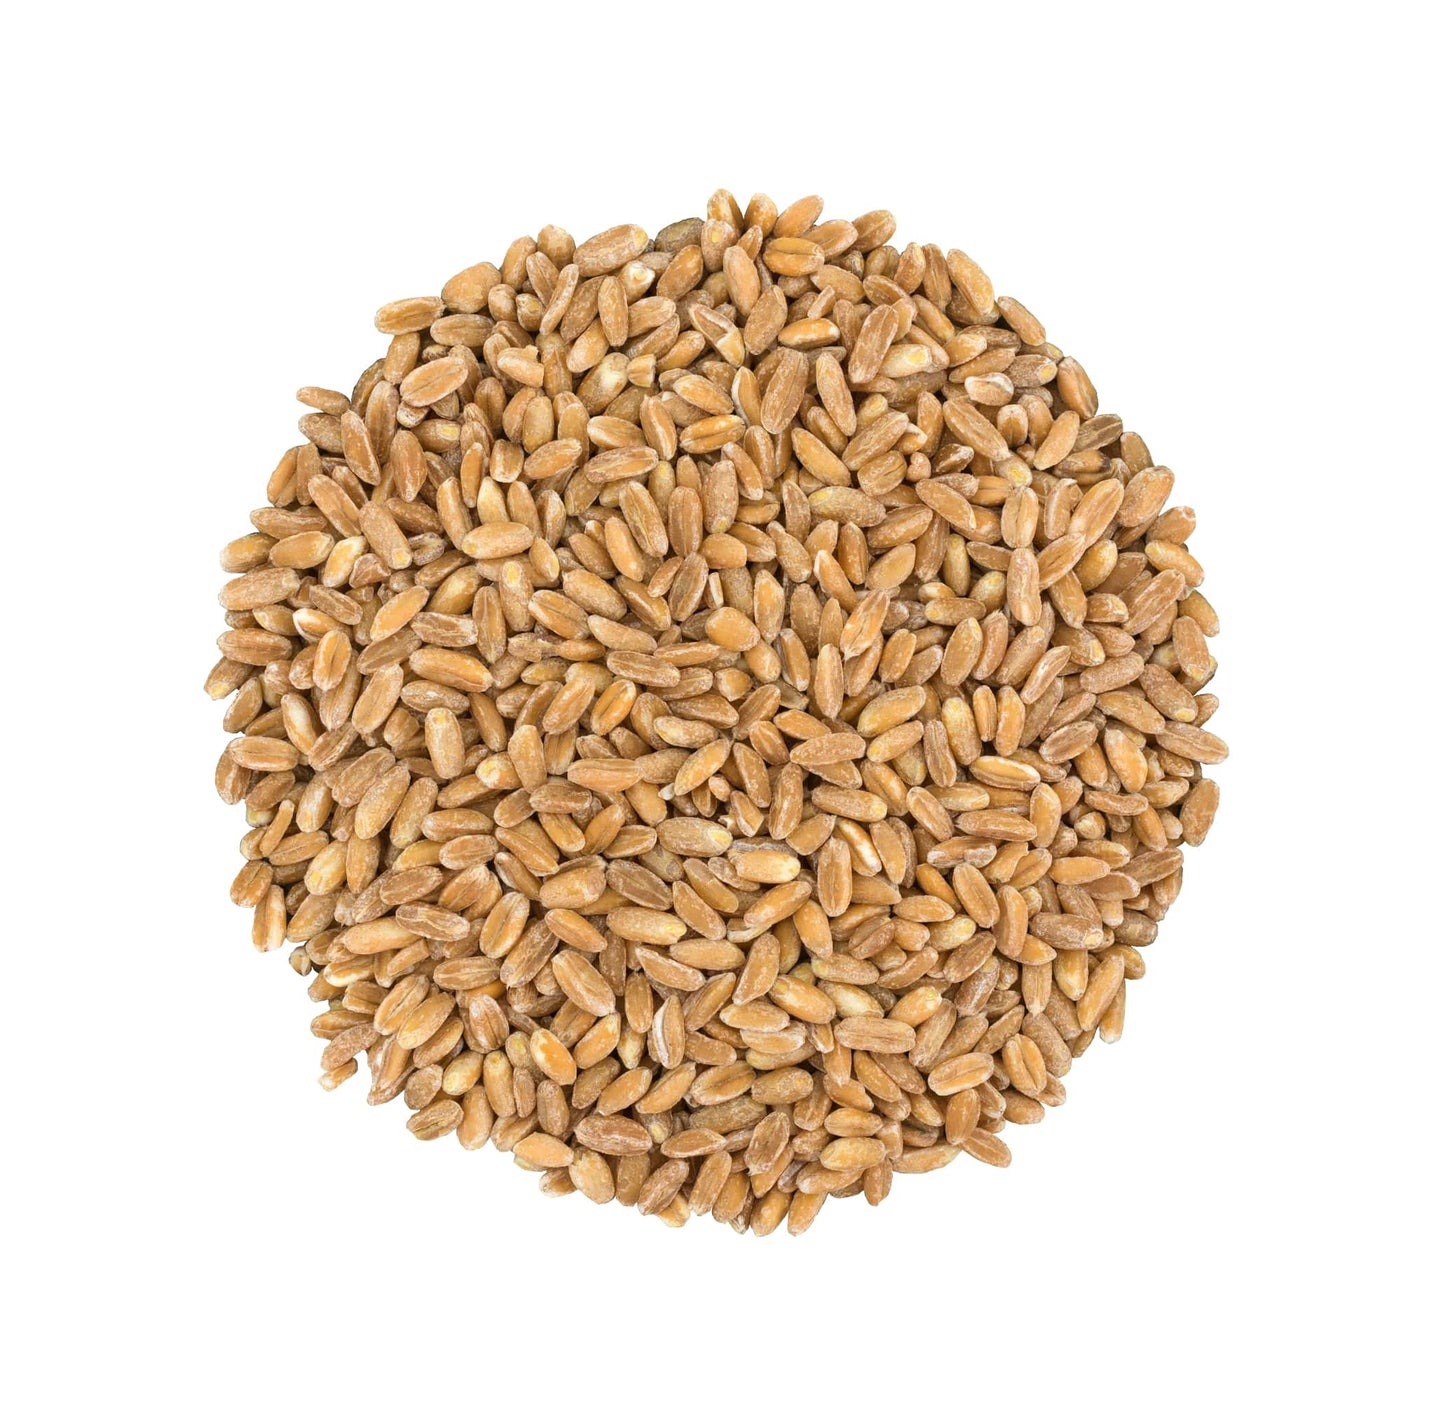 Pearled Farro Grain - Kosher, Vegan, Whole Grain in Bulk, Good Source of Dietary Fiber, Protein and Iron - by Food to Live